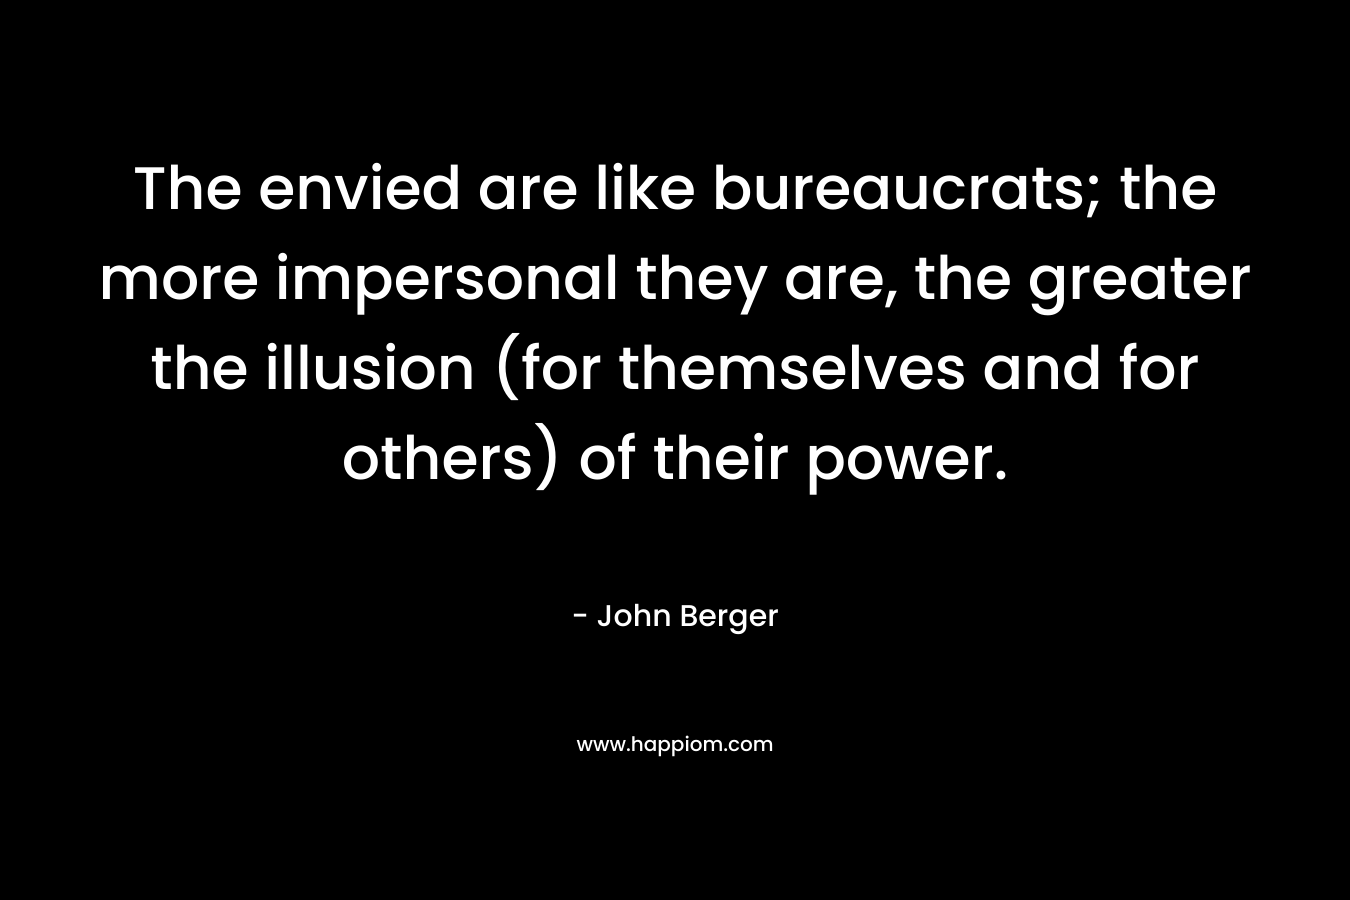 The envied are like bureaucrats; the more impersonal they are, the greater the illusion (for themselves and for others) of their power.